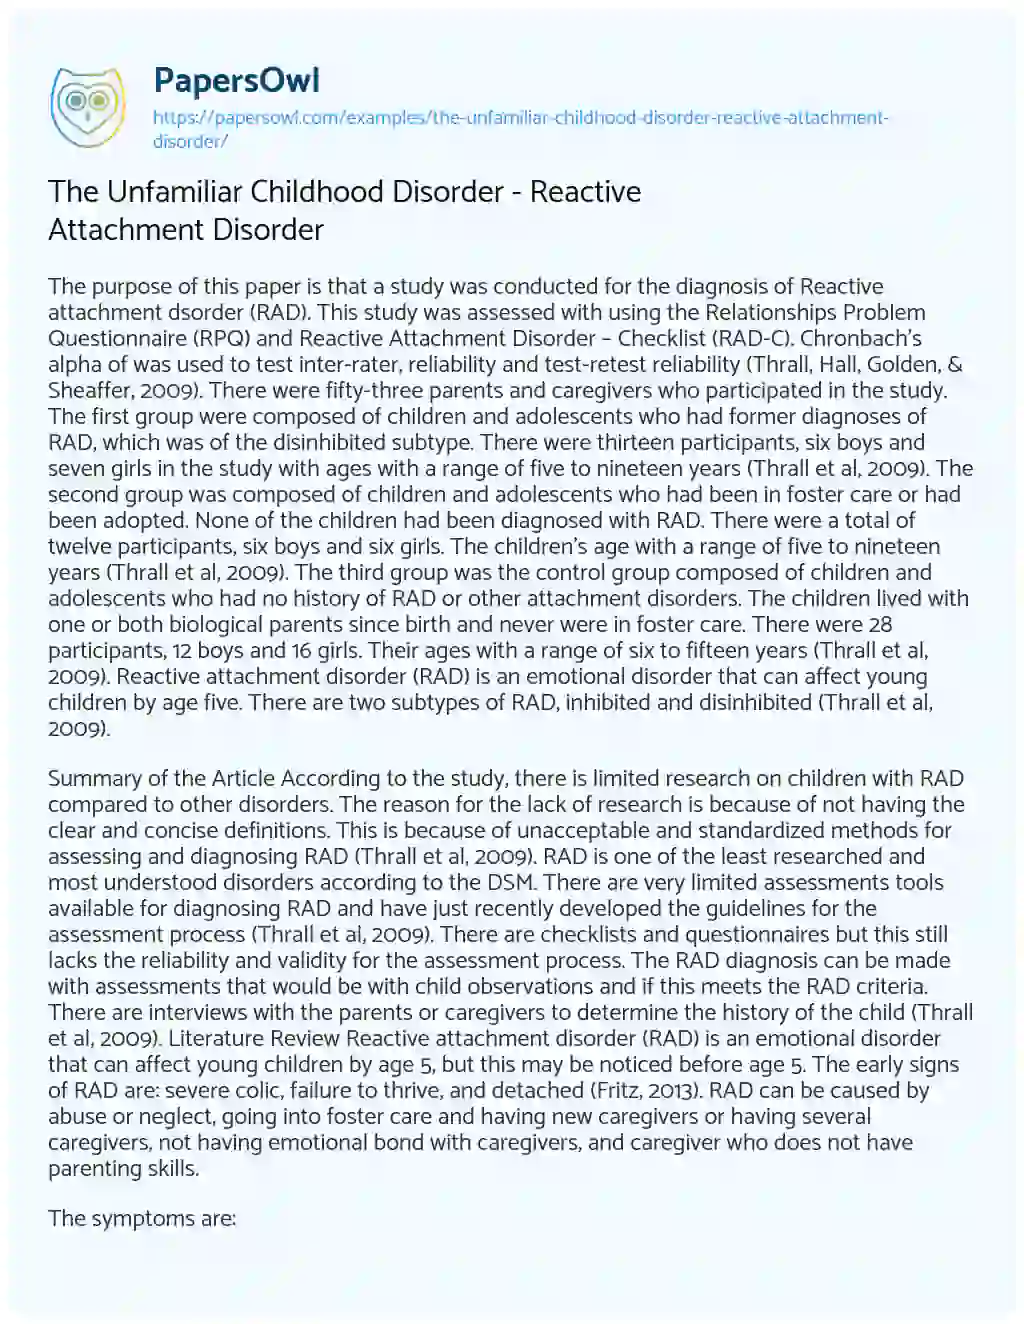 Essay on The Unfamiliar Childhood Disorder – Reactive Attachment Disorder